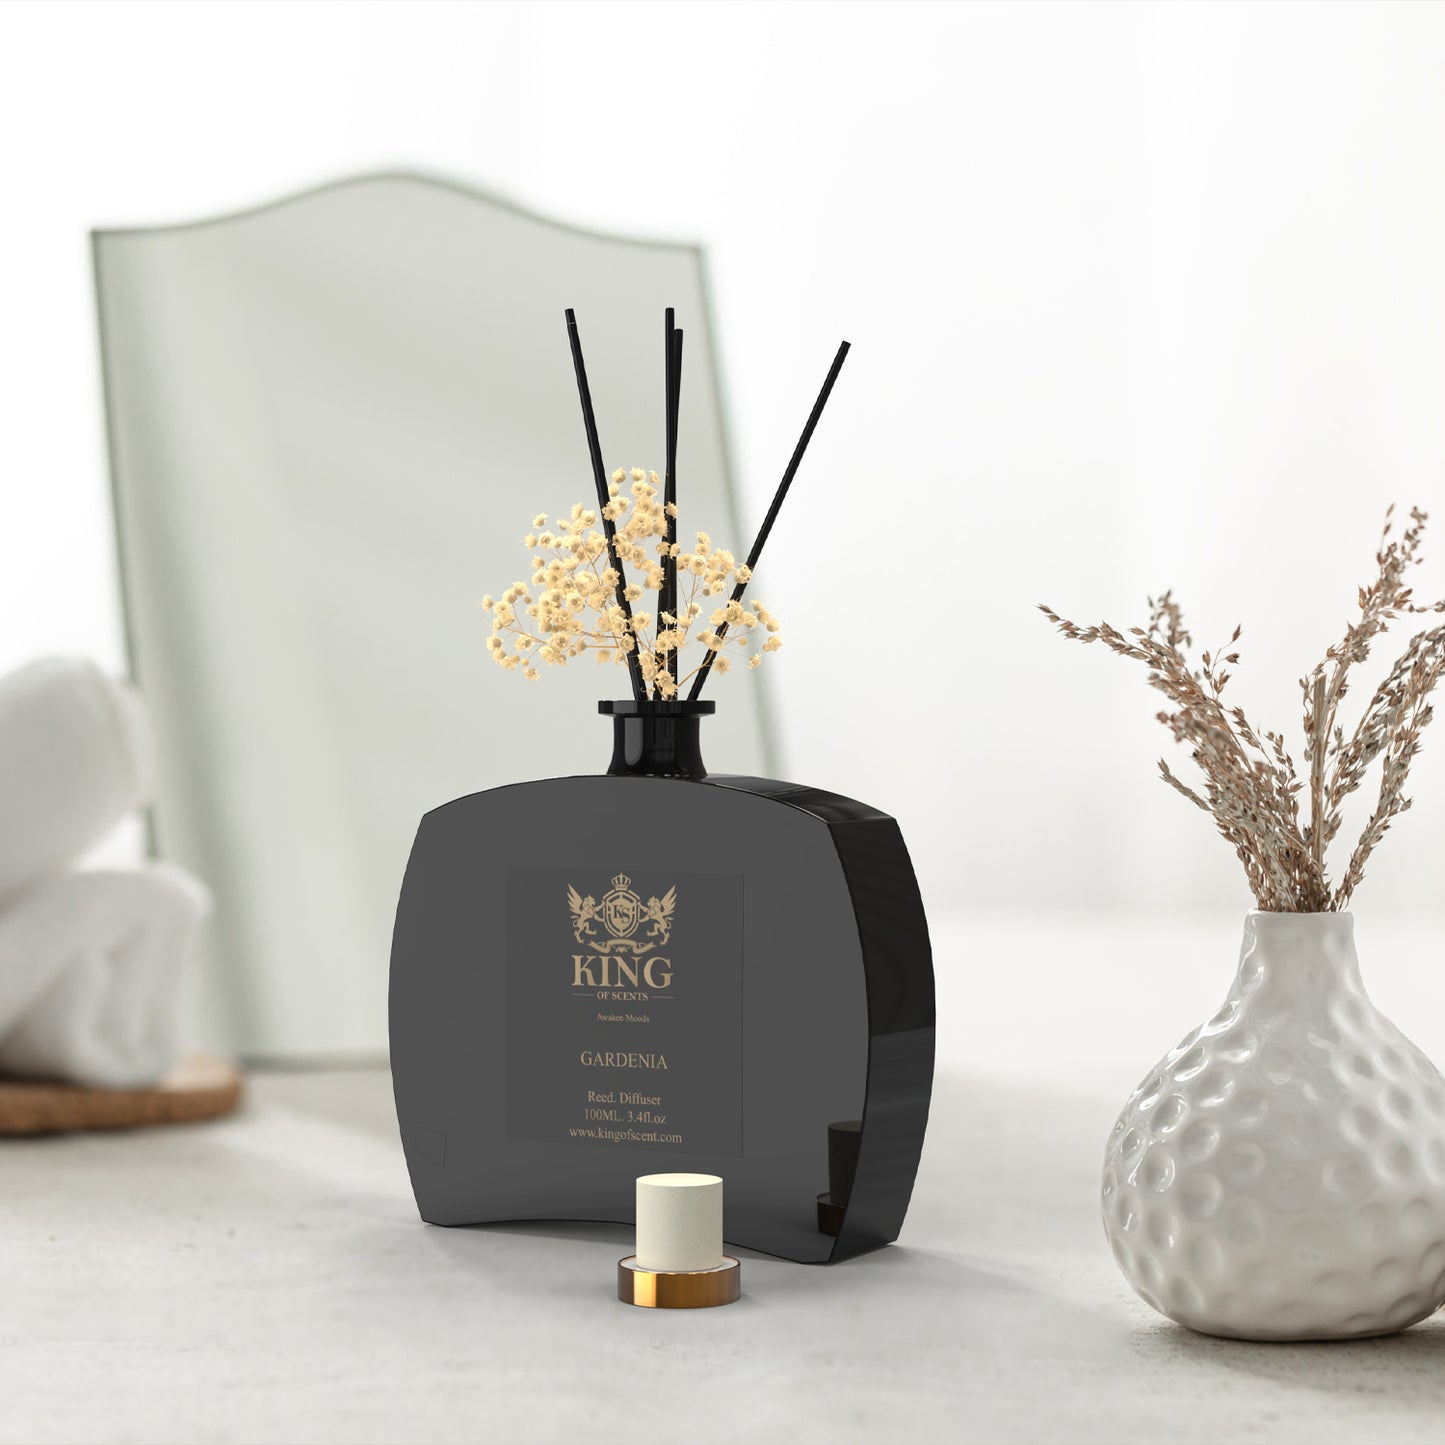 King of scents Aroma Premium Reed Diffuser Set with Preserved Baby's Breath & Cotton Stick GARDENIA Scent Fragrance Oil Diffuser for Bedroom Bathroom Home Décor